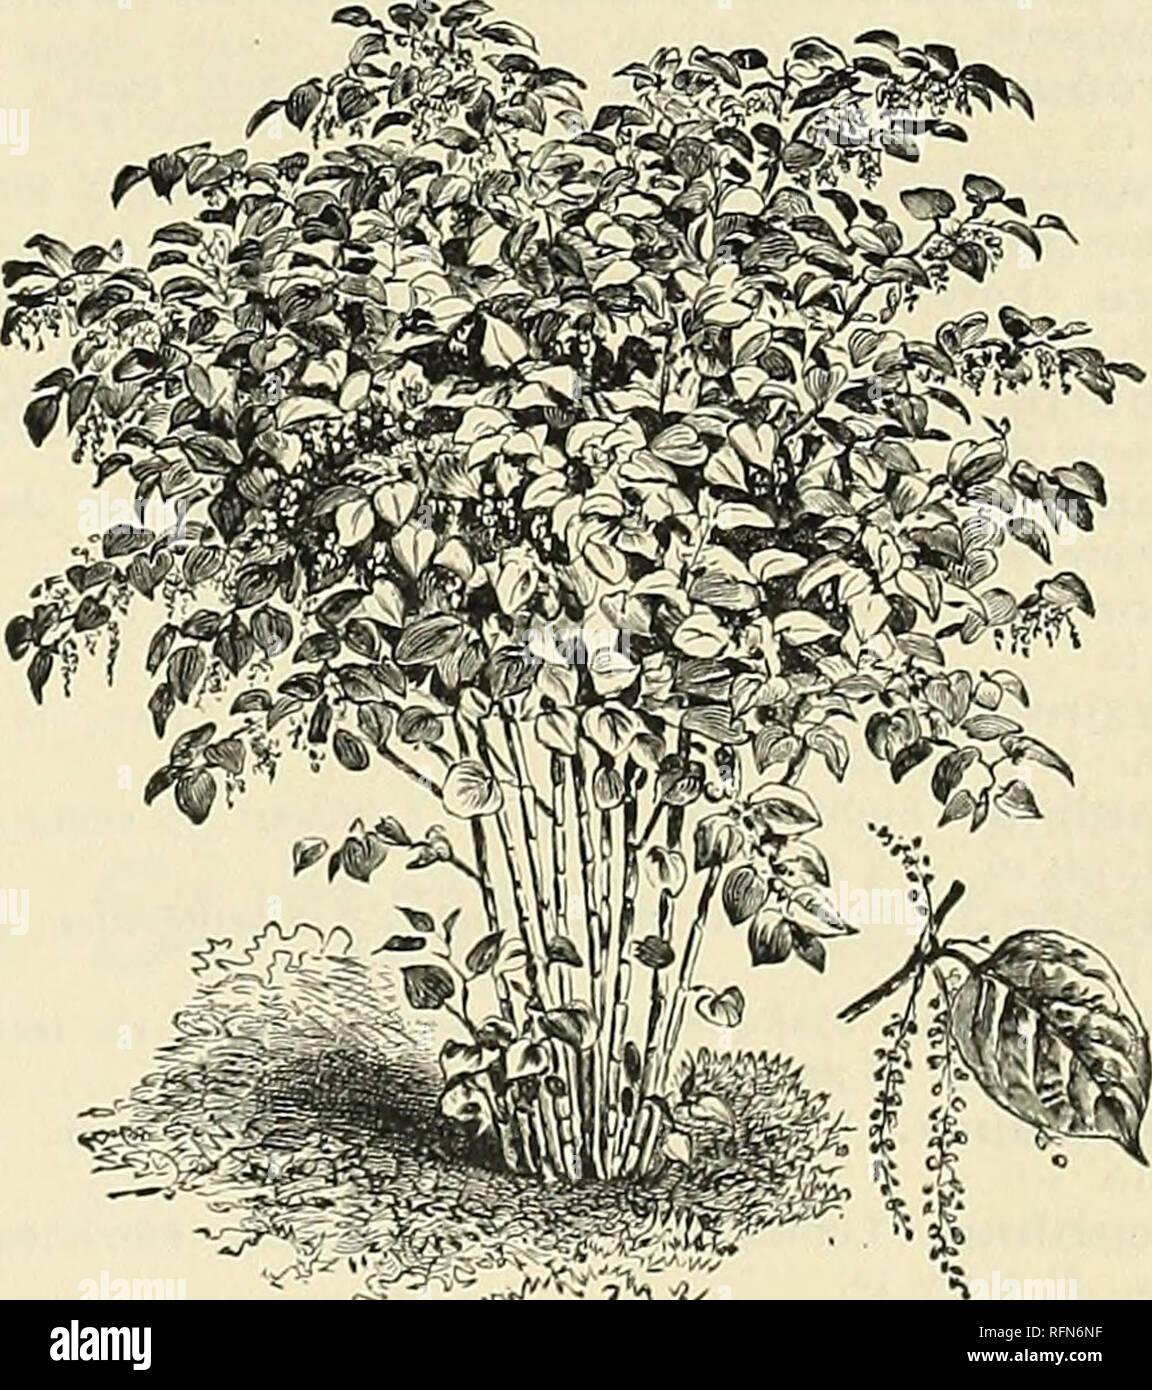 . Descriptive catalogue of ornamental trees, shrubs, vines, evergreens, hardy plants and fruits. Nurseries (Horticulture), Pennsylvania, Catalogs; Trees, Seedlings, Catalogs; Ornamental shrubs, Catalogs; Flowers, Catalogs; Fruit, Catalogs. Plumbago Larpentae. Potentilla COCCinea. Scarlet. June to August. 1 foot. 25 cents each. $2 00 per 10. &quot; lacunosa. Yellow. June to August. 1 foot. 15 cents each. $1 25 per 10. &quot; recta. Yellow. June to August. 1 foot. per 10. &quot; rupestriS. White. June to August. 1 foot. 15 cents each. $1 25 per 10. Polygonatum multiflorum. white. feet. 15 cents  Stock Photo